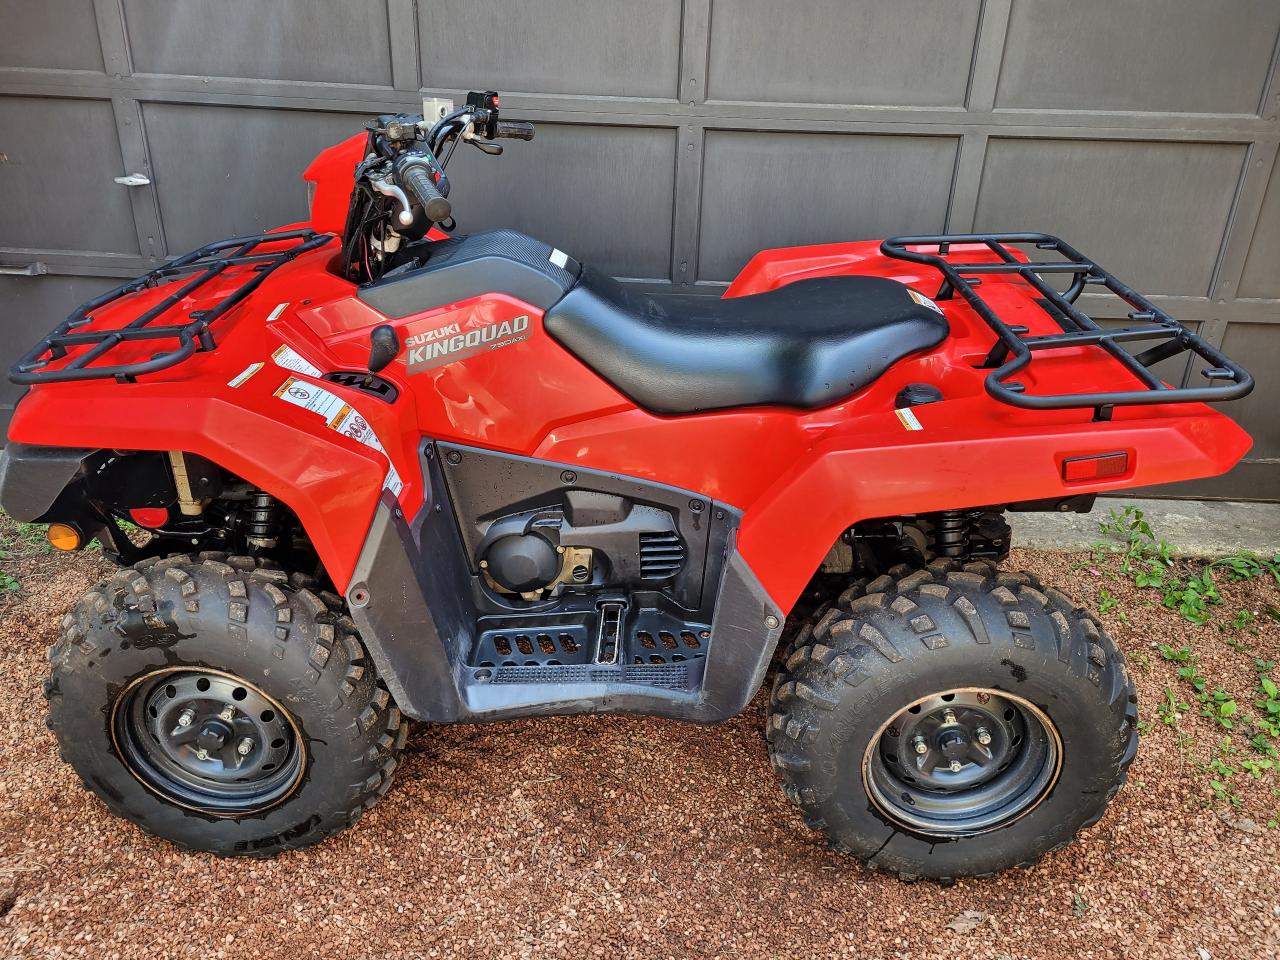 2022 Suzuki KingQuad 750AXi  4x4 1-Owner Financing Available Trade-ins Welcome! - Photo #1